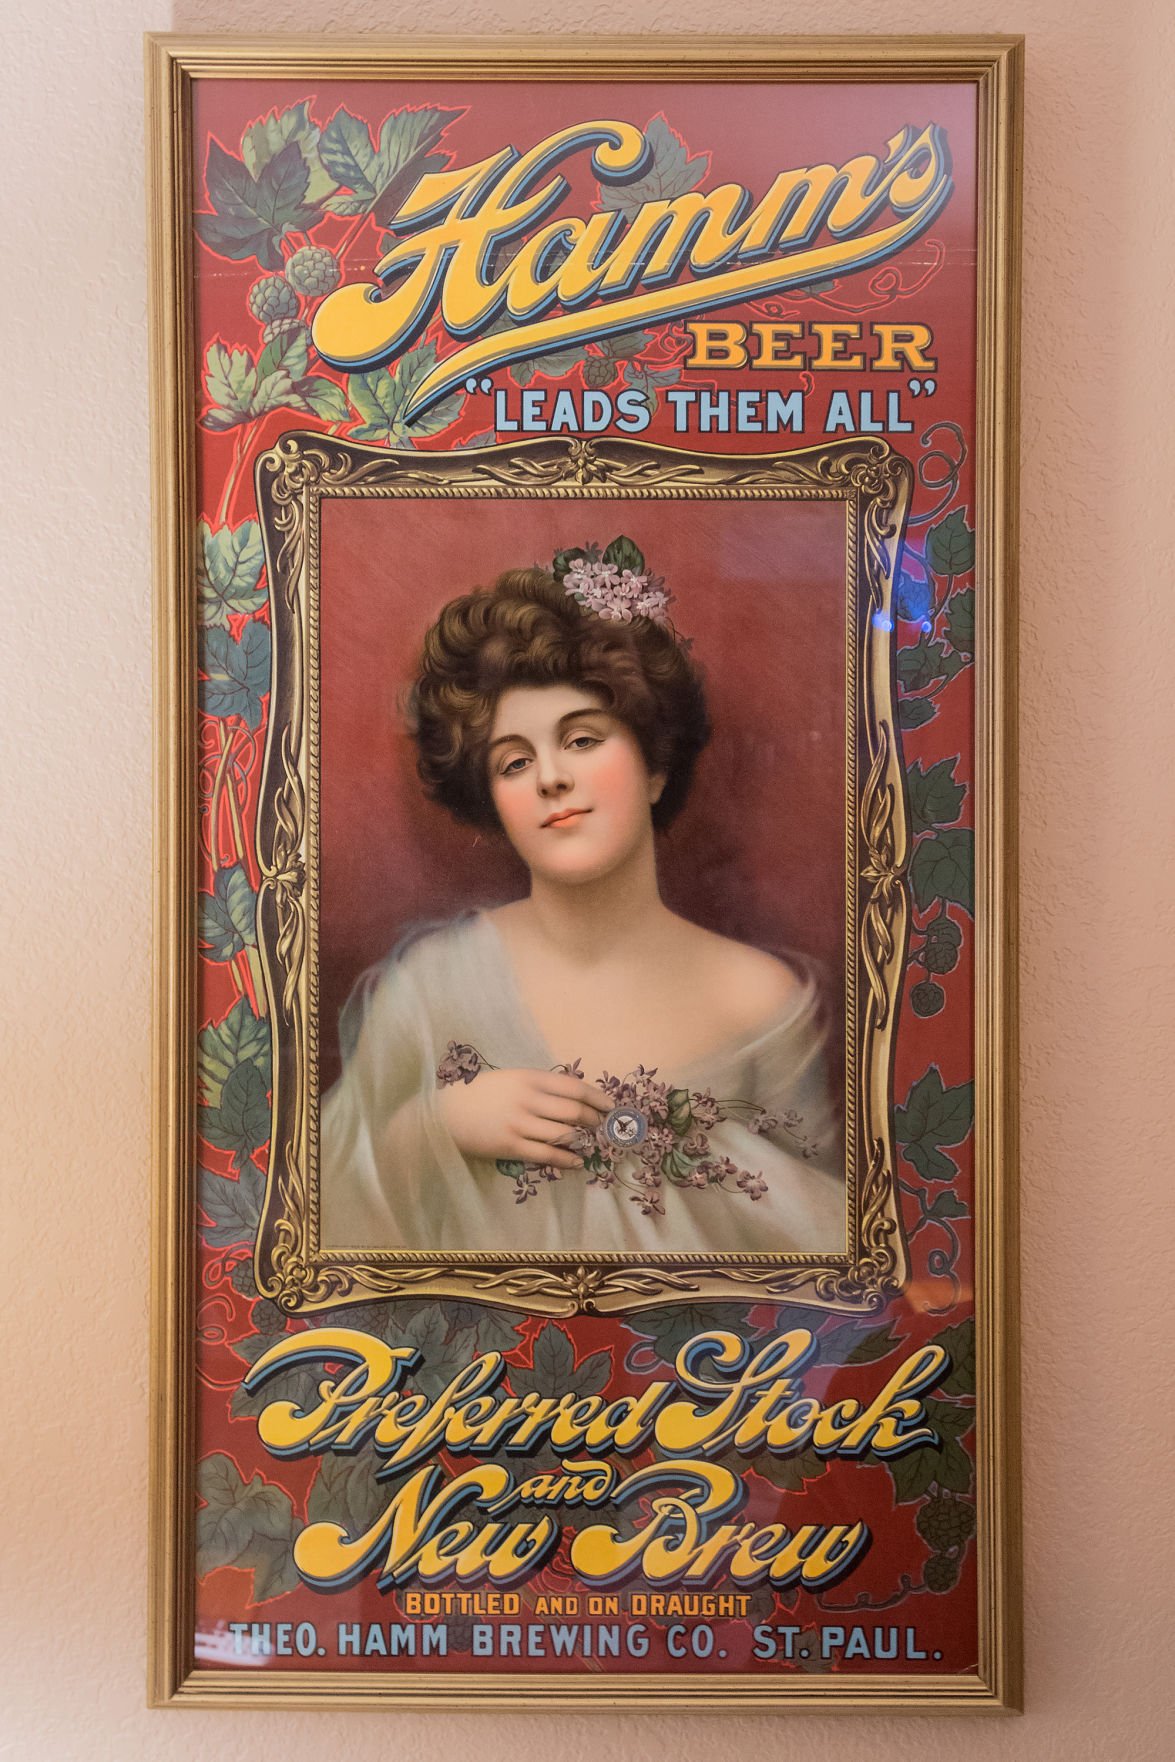 Old Style beer from an Old Style town — Land of Sky Beer Waters